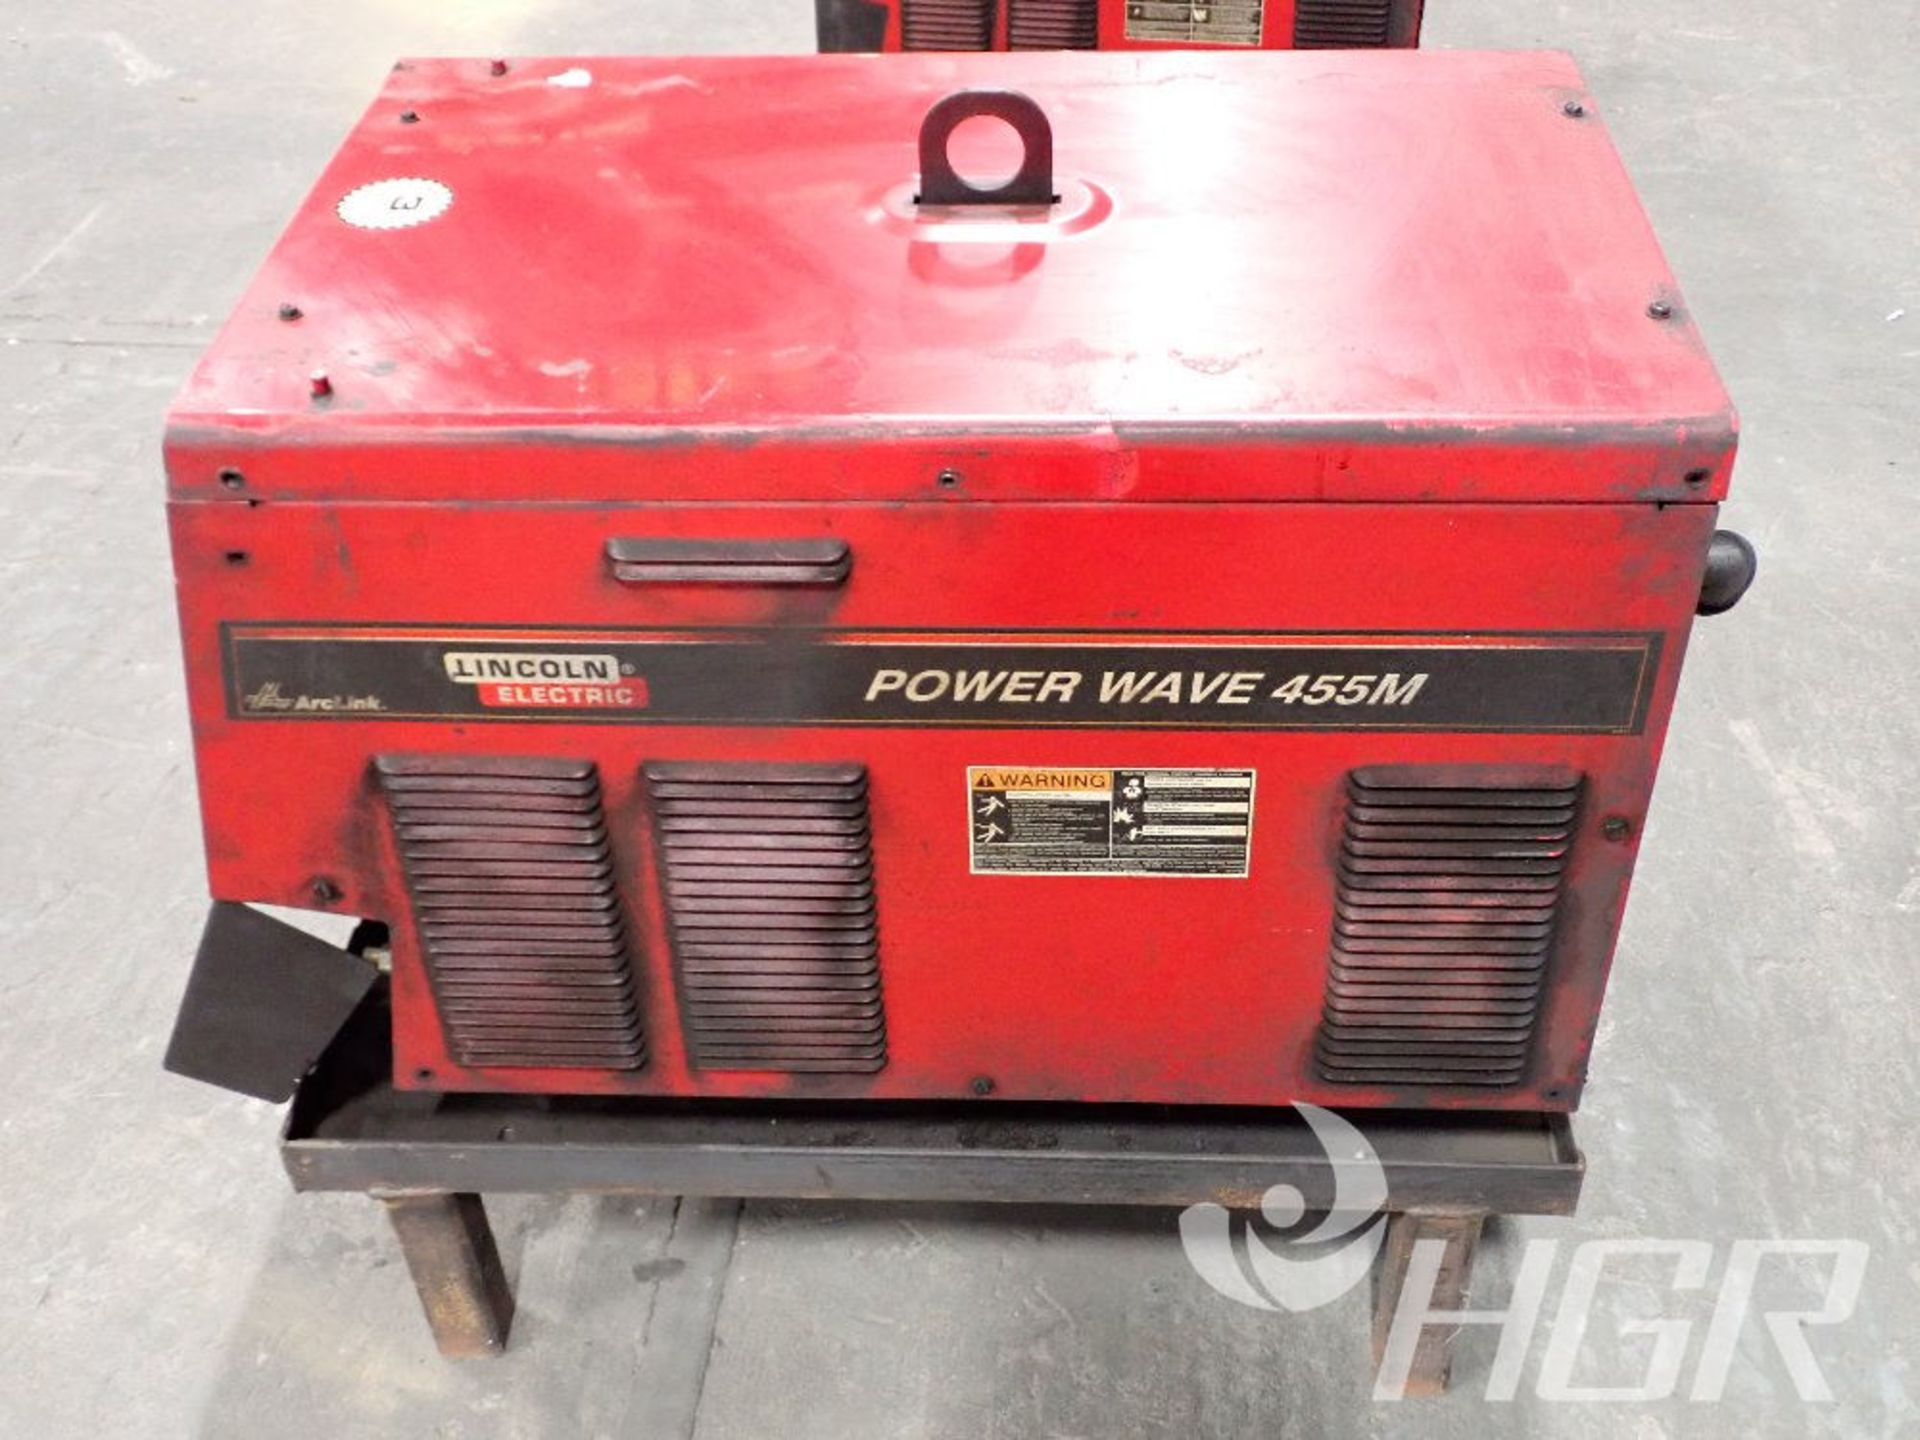 LINCOLN ELECTRIC WELDER, Model POWER WAVE 455M, Date: n/a; s/n SPLC42304401050804385, Approx. - Image 7 of 8